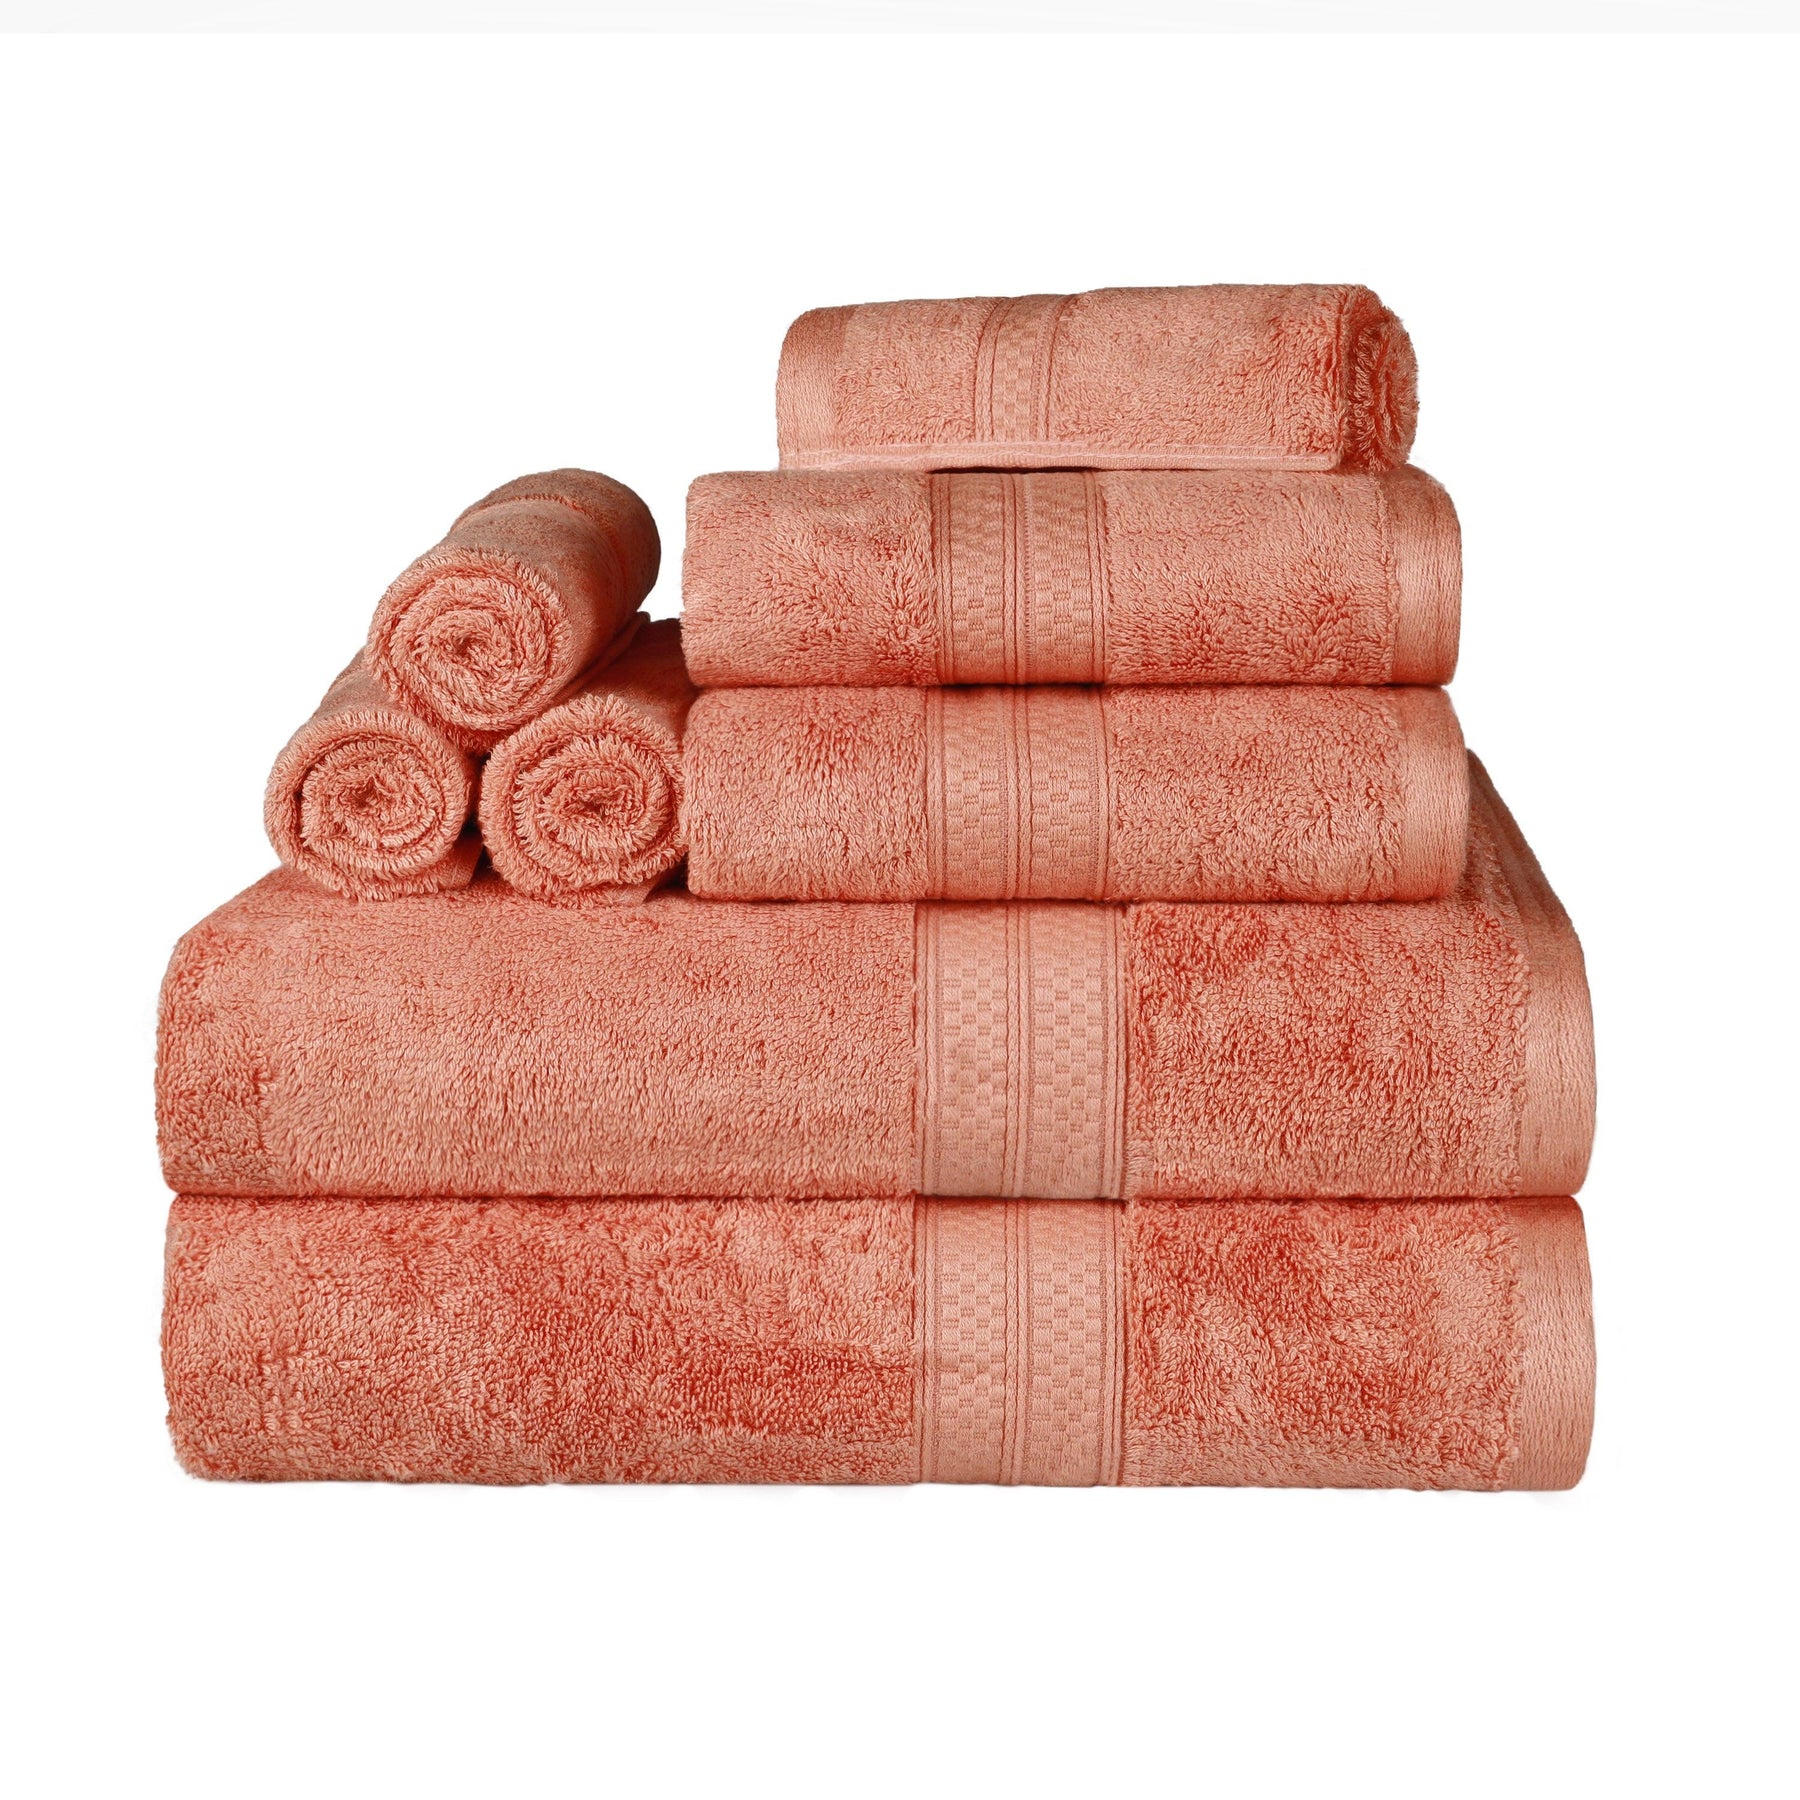  Ultra-Soft Hypoallergenic Rayon from Bamboo Cotton Blend Assorted Bath Towel Set -  Salmon